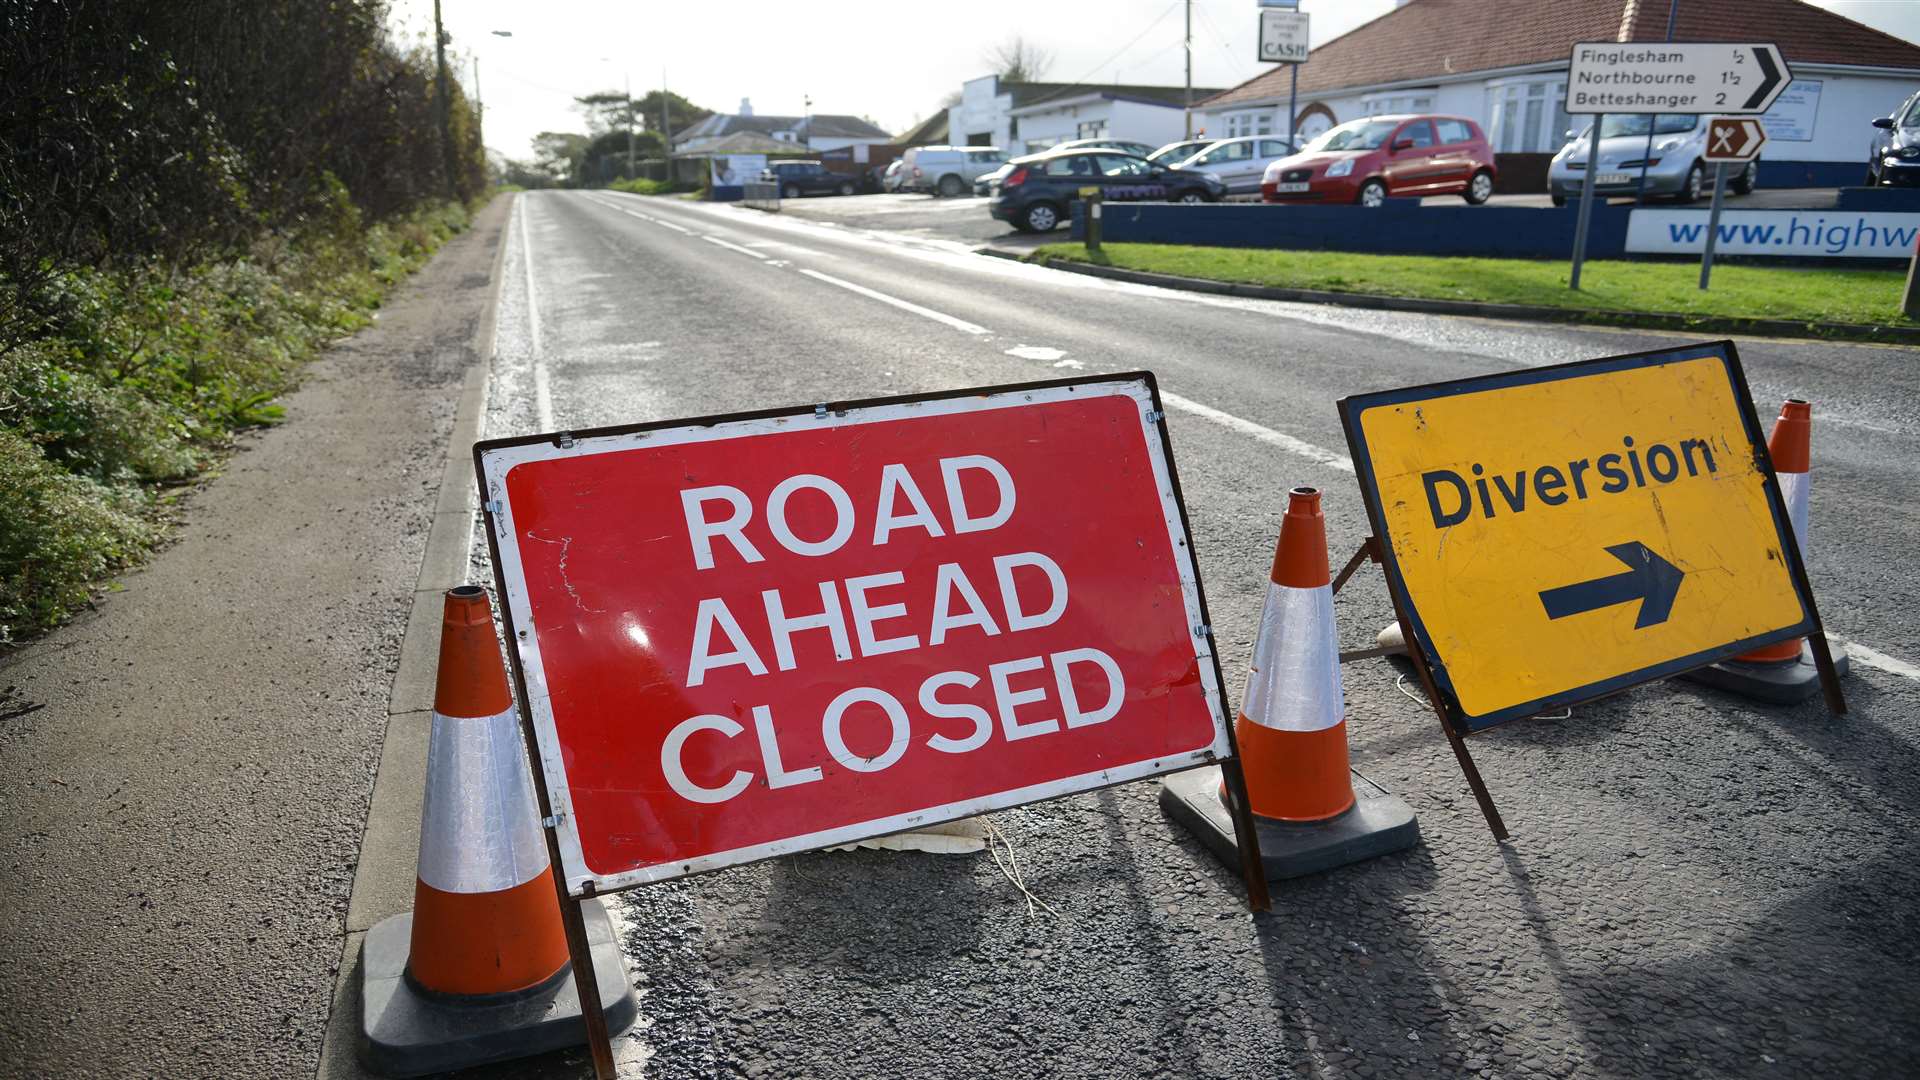 The A258 between Sandwich and Deal was closed for seven hours